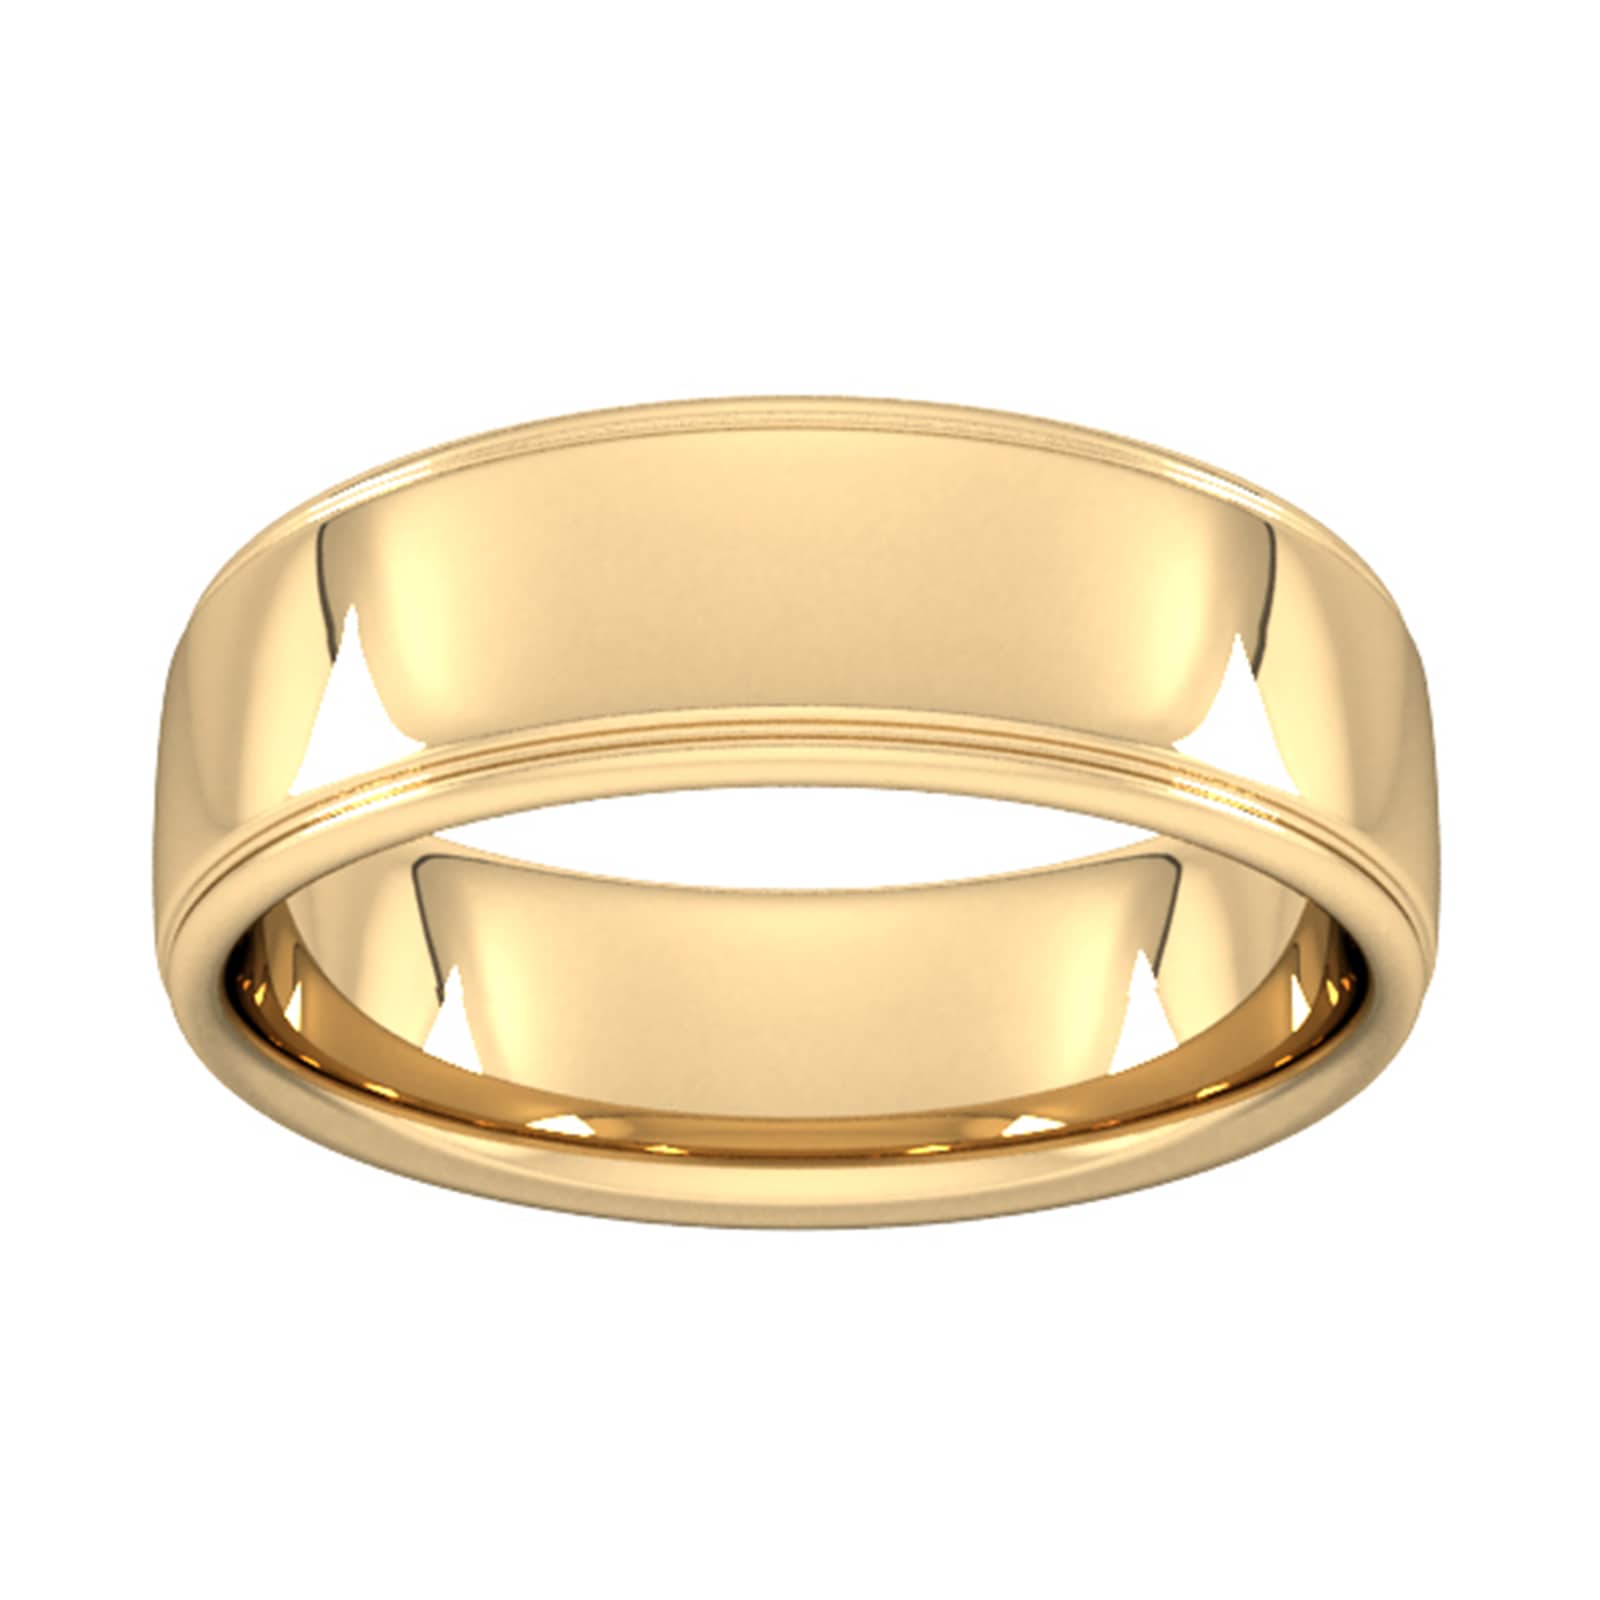 9ct vs. 18ct Gold: What's the difference and does it matter? - Lebrusan  Studio